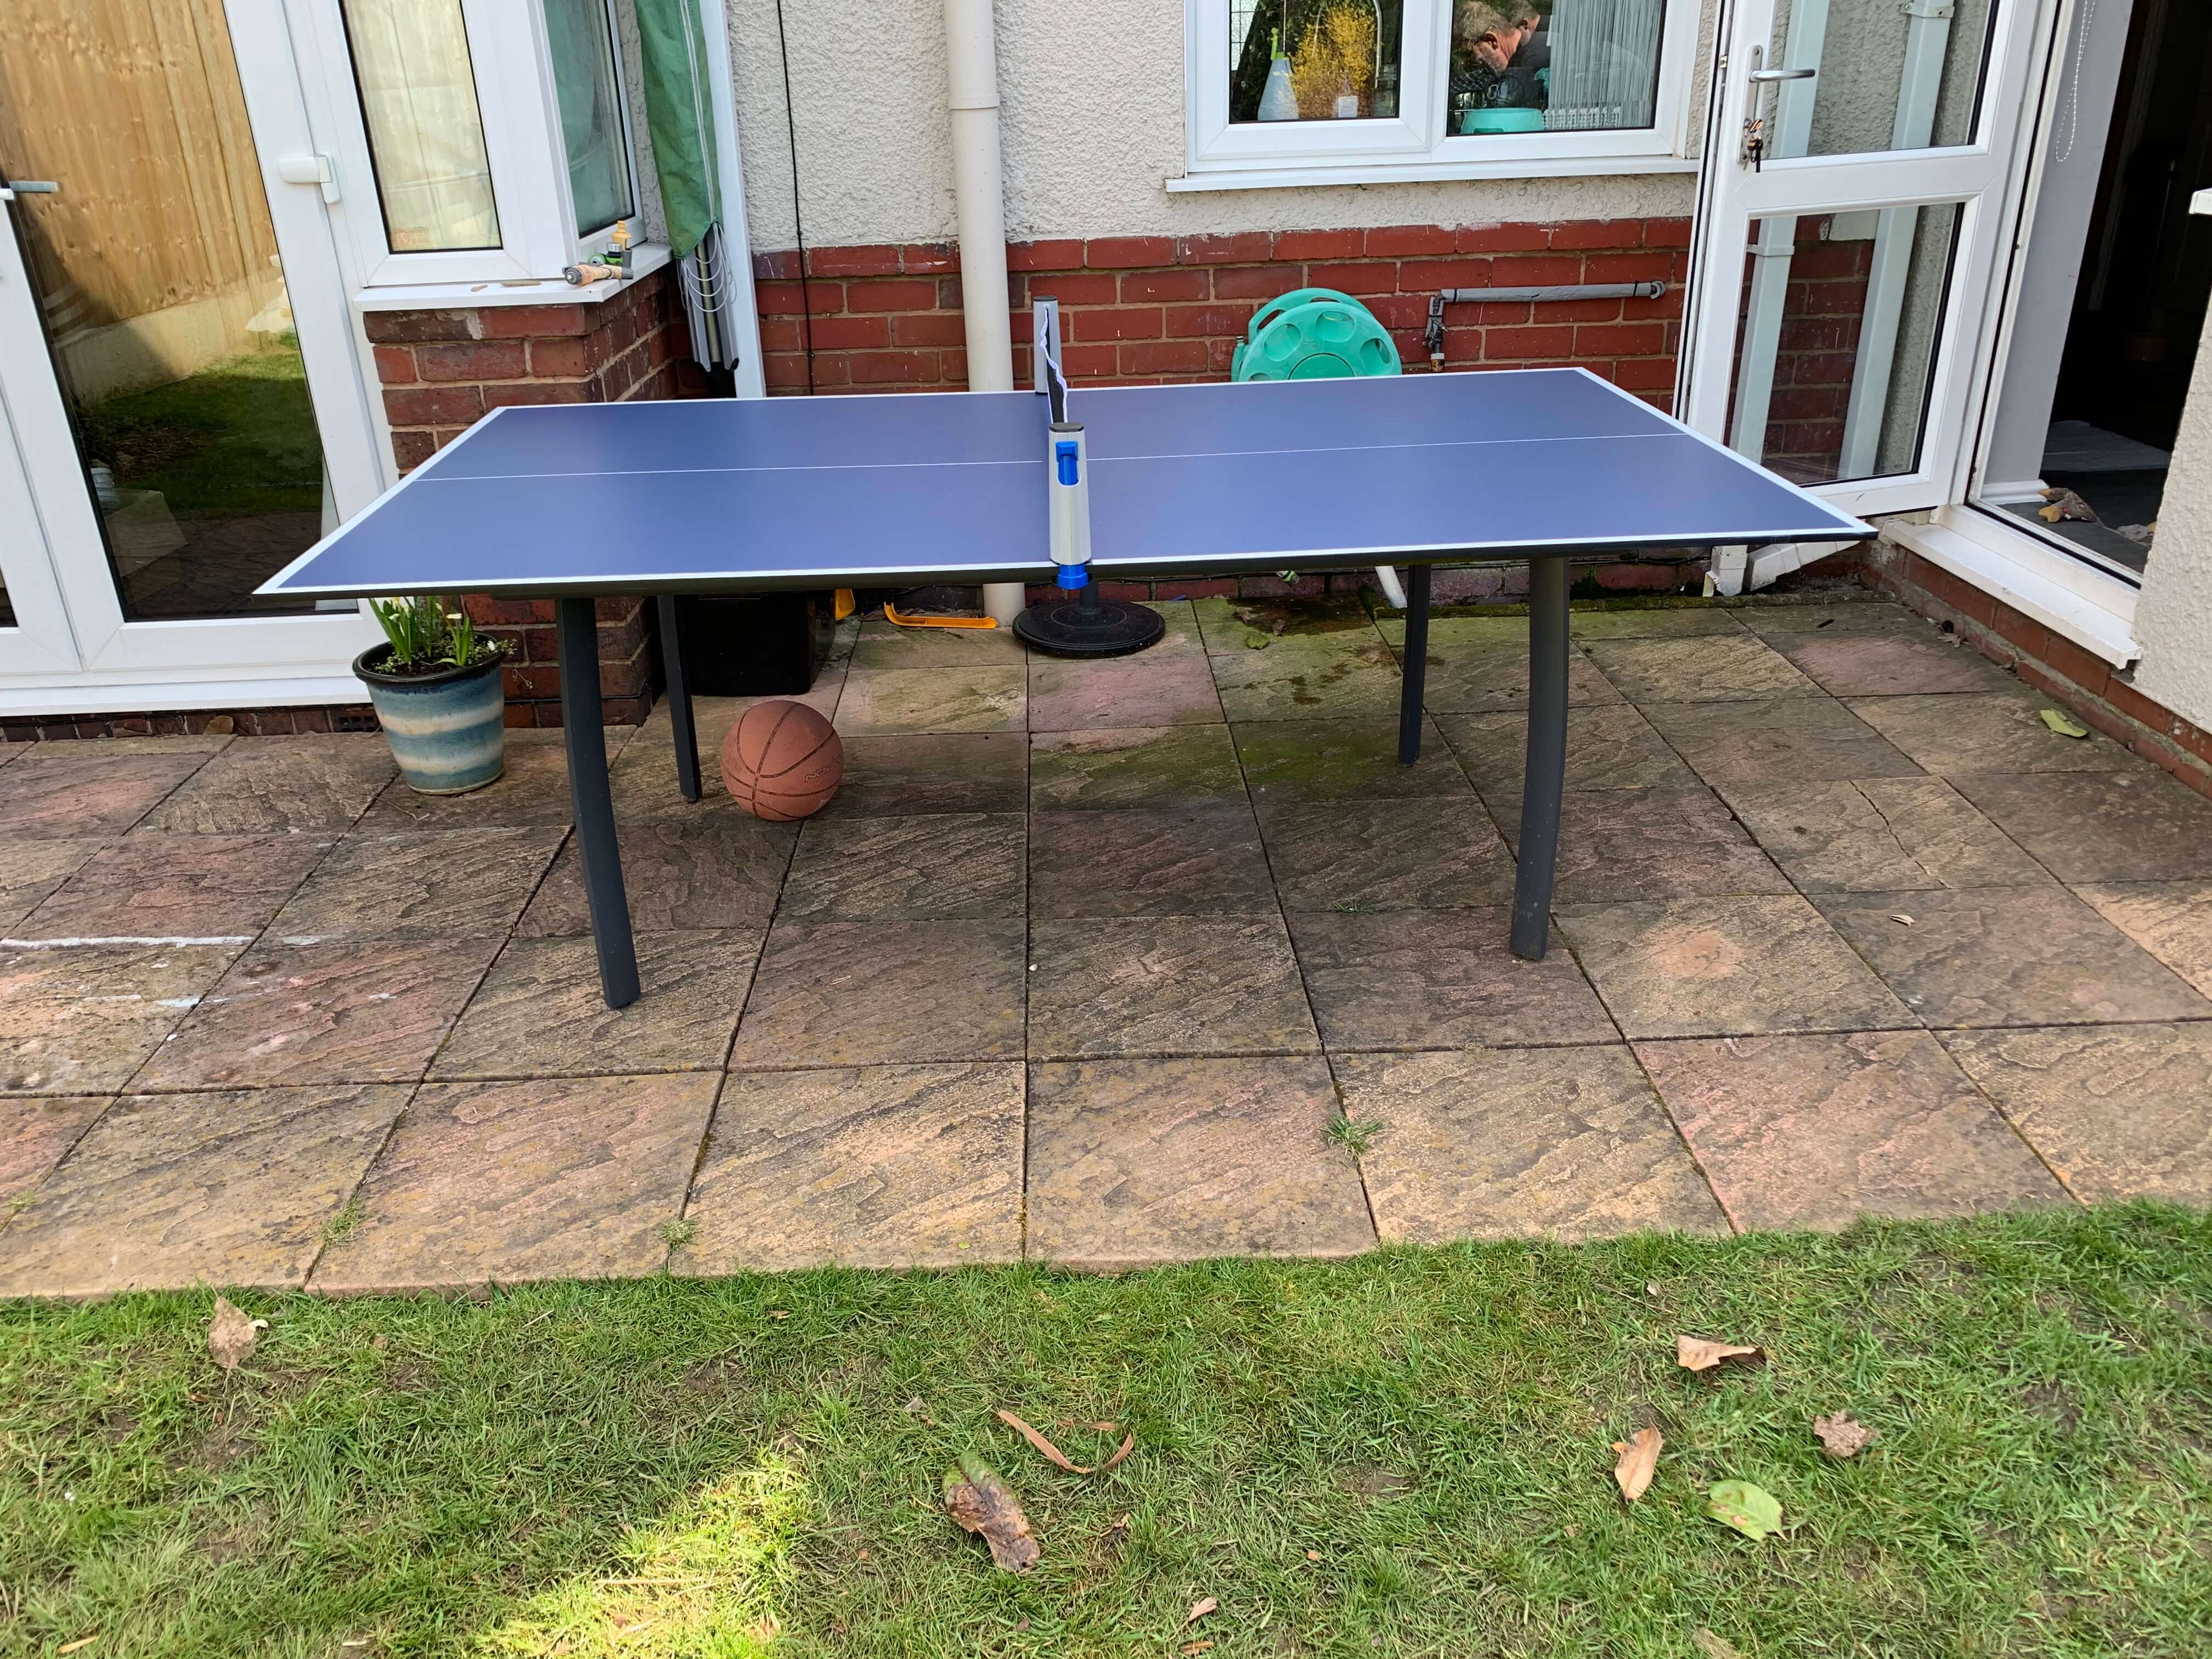 Table Tennis Top For Dining Room Table